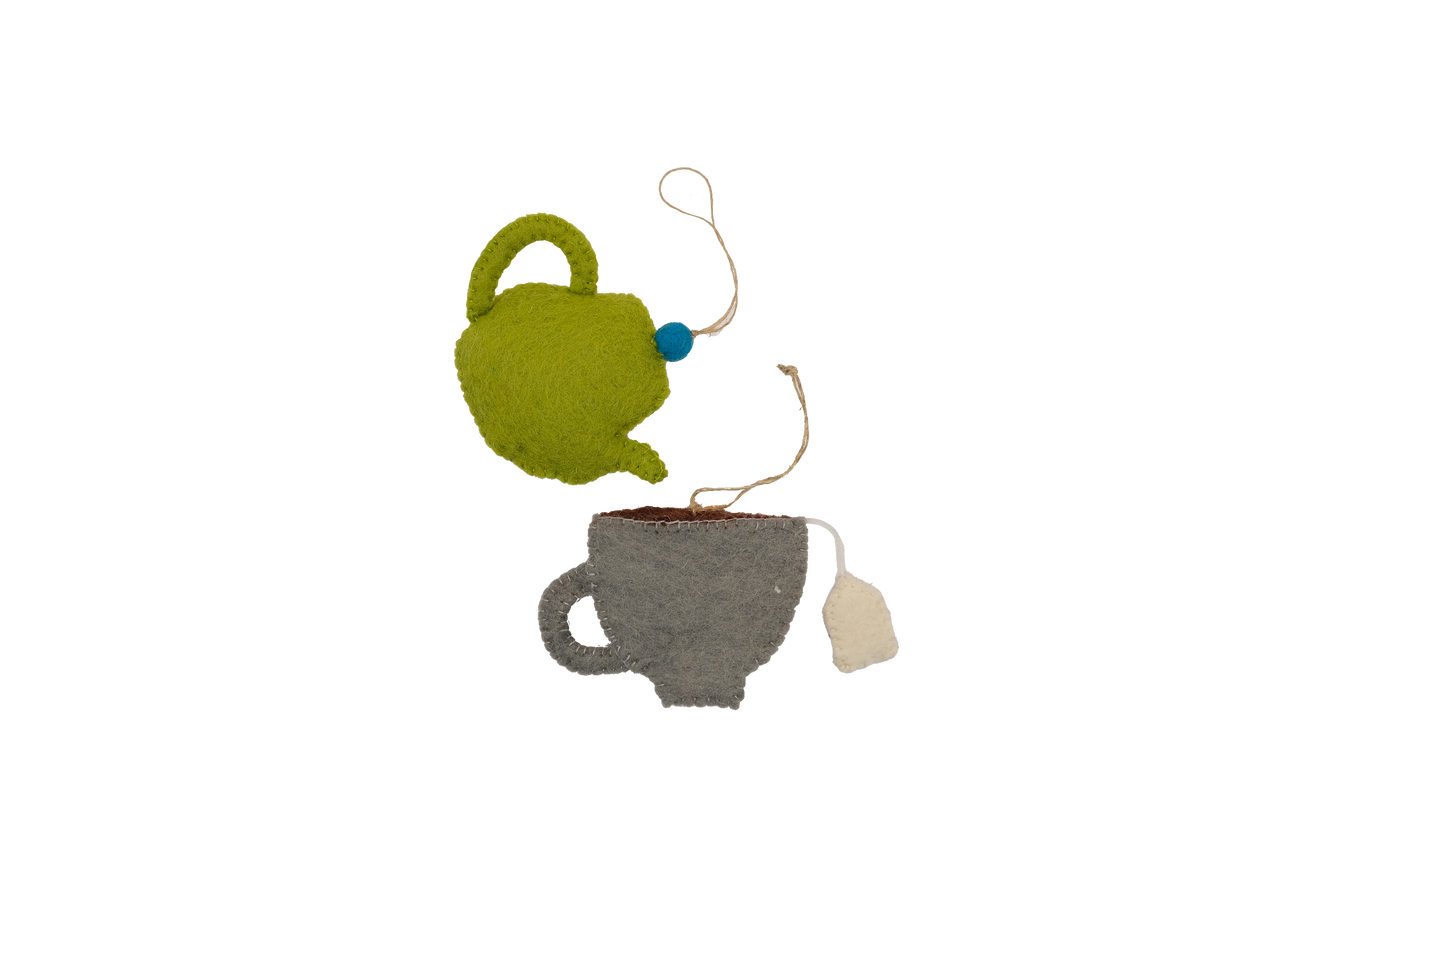 This Global Groove Life, handmade, ethical, fair trade, eco-friendly, sustainable, New Zealand wool felt, grey, blue & matcha green heart teapot and teacup ornament set was created by artisans in Kathmandu Nepal and will bring colorful warmth and fun to your Christmas tree this season.